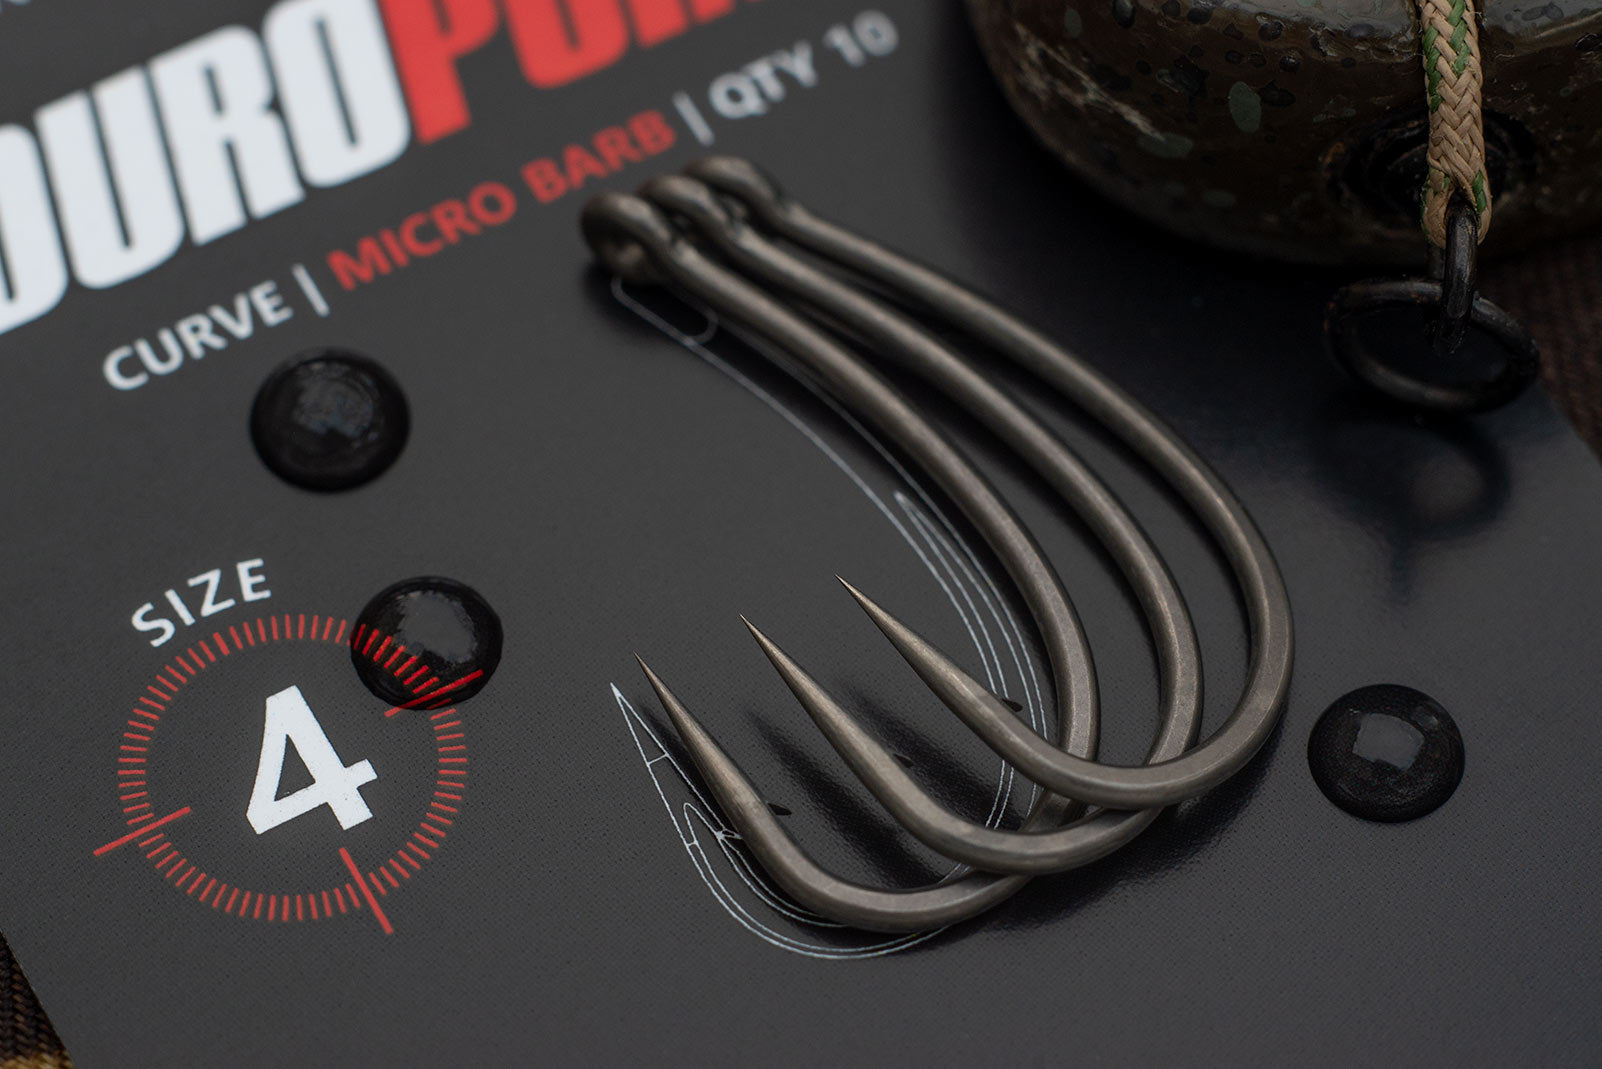 DUROPOINT Curve hook - Carp hooks by Angling Iron